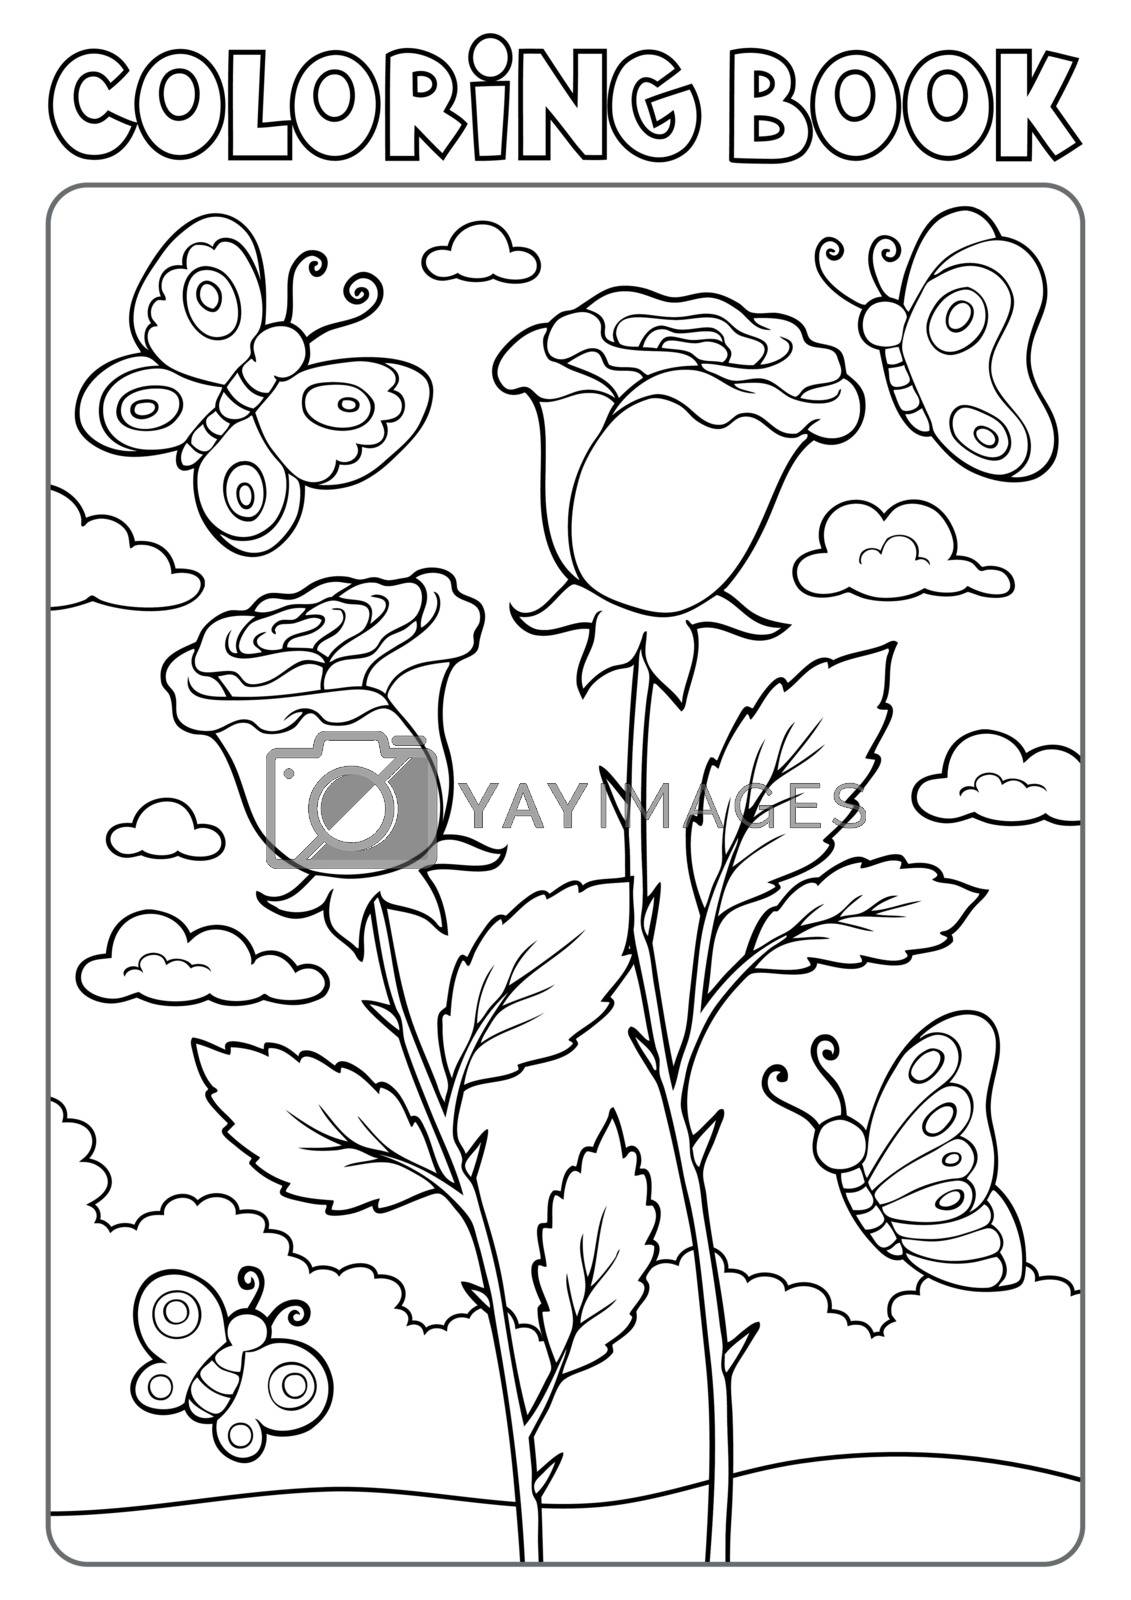 Royalty free image of Coloring book roses and butterflies by clairev